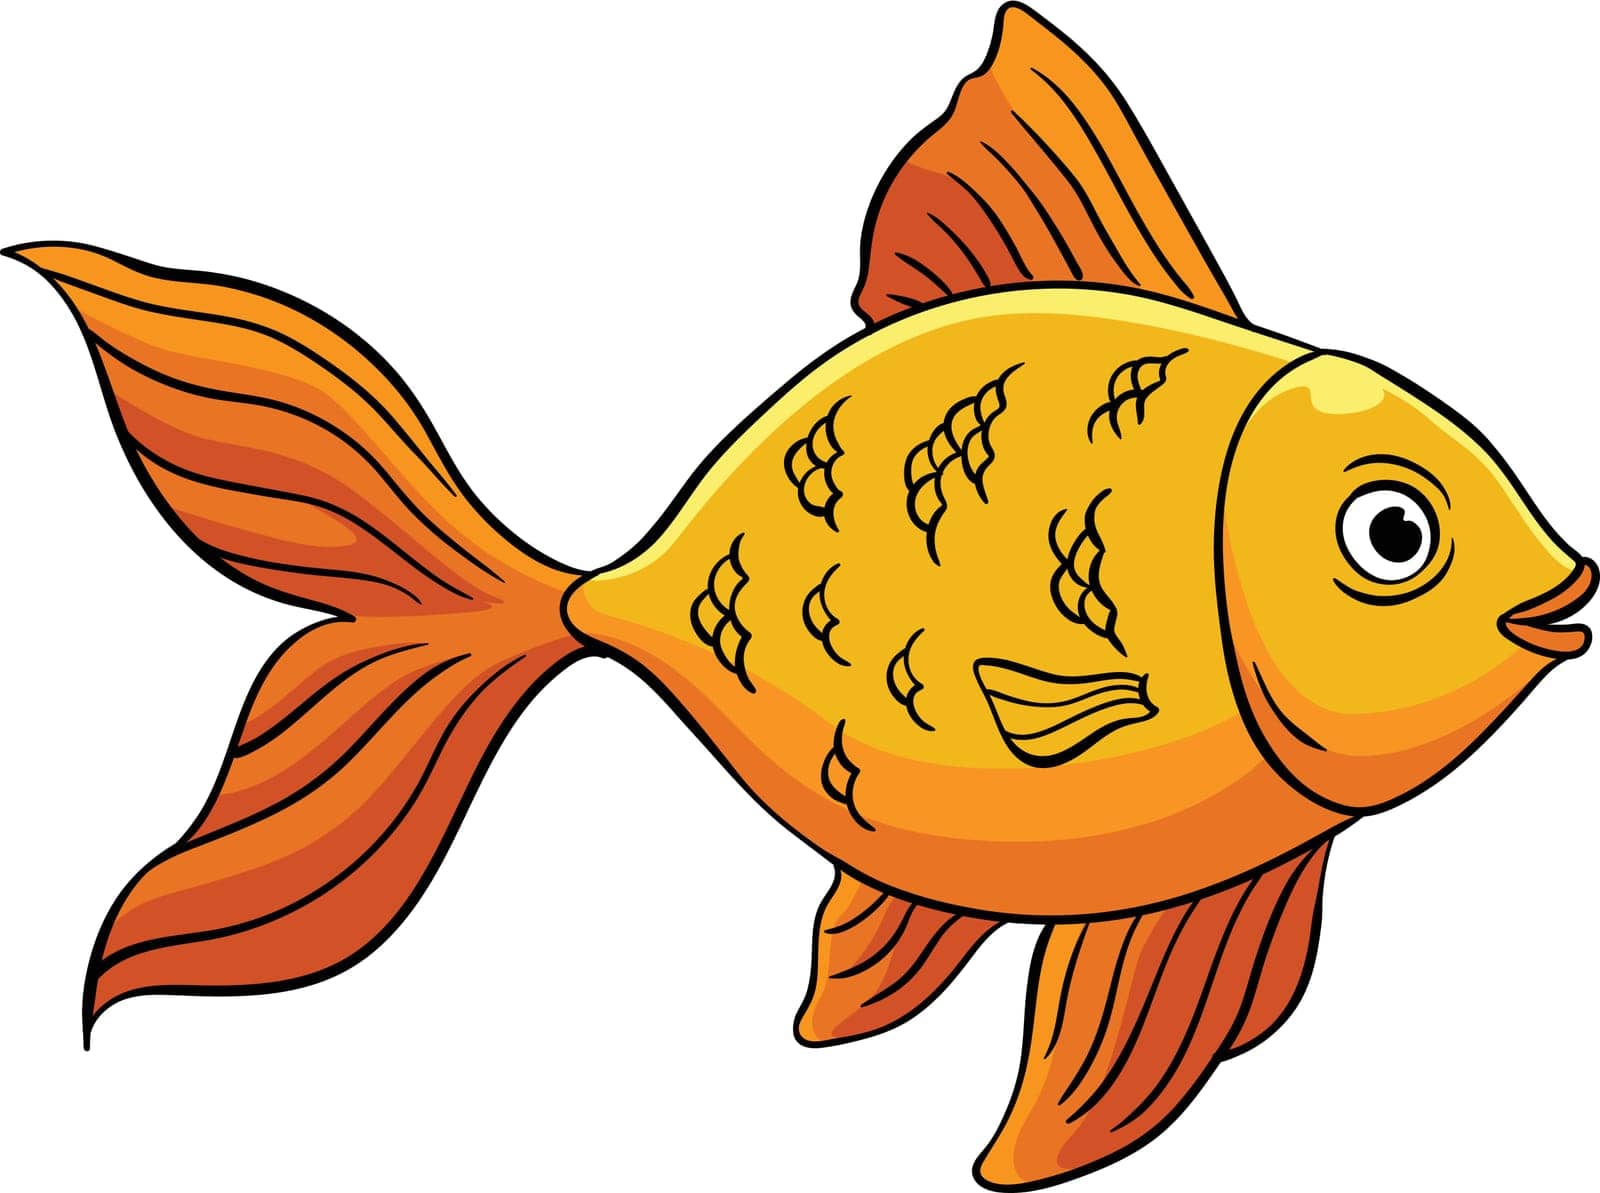 This cartoon clipart shows a Goldfish illustration.